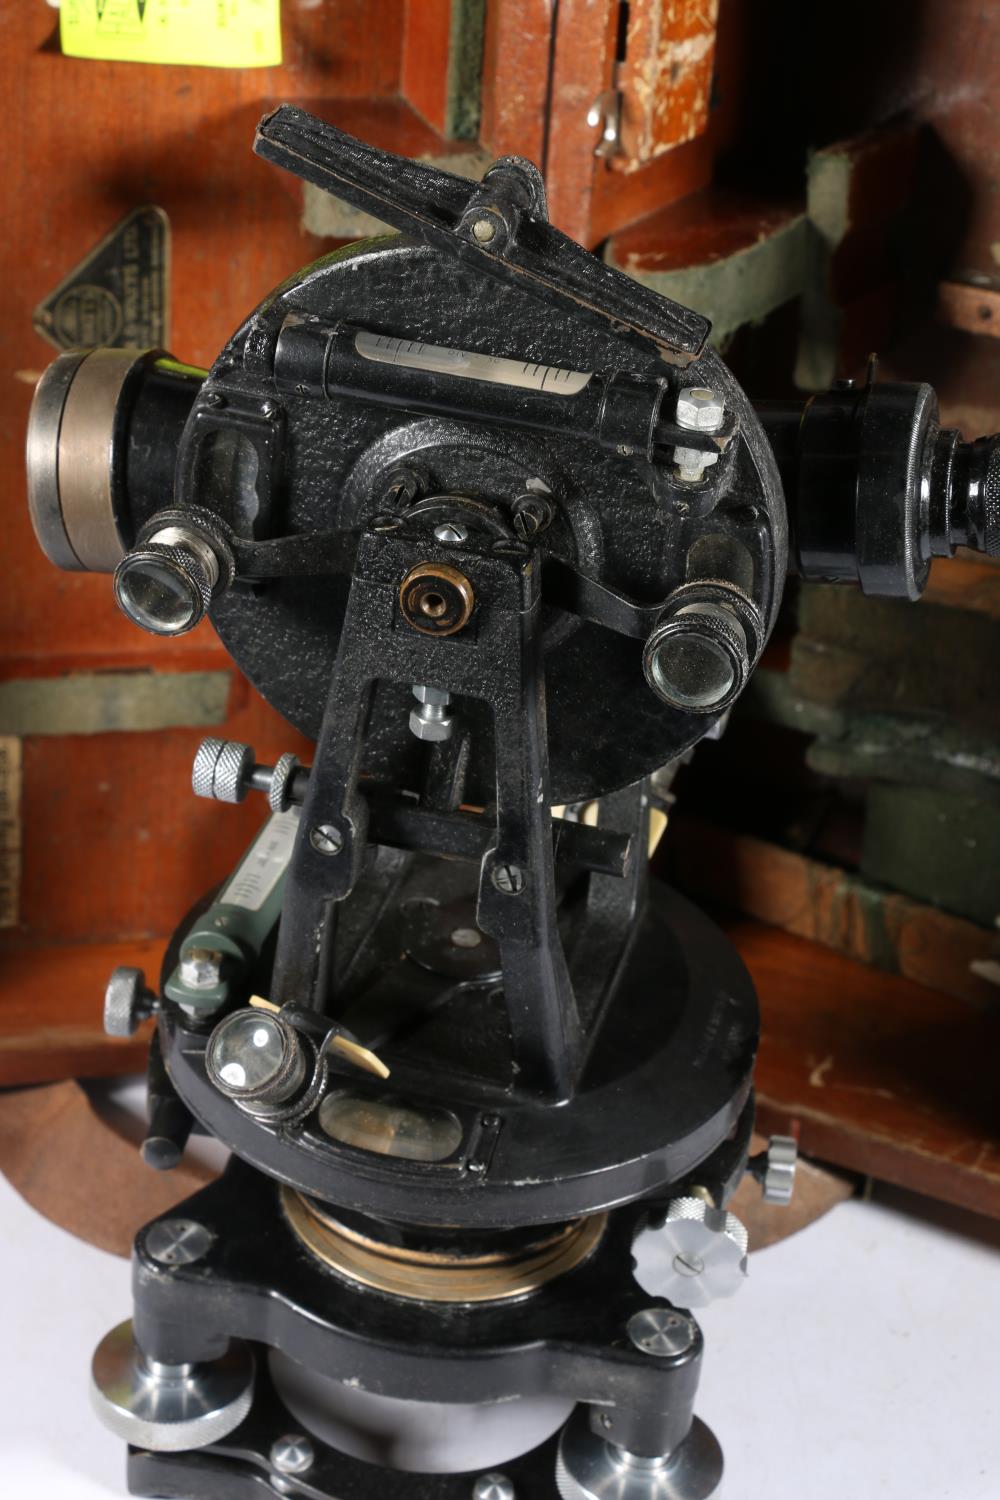 Hilger & Watts Limited, Watts of London surveyors level or theodolite #70044 in mahogany case. - Image 2 of 3